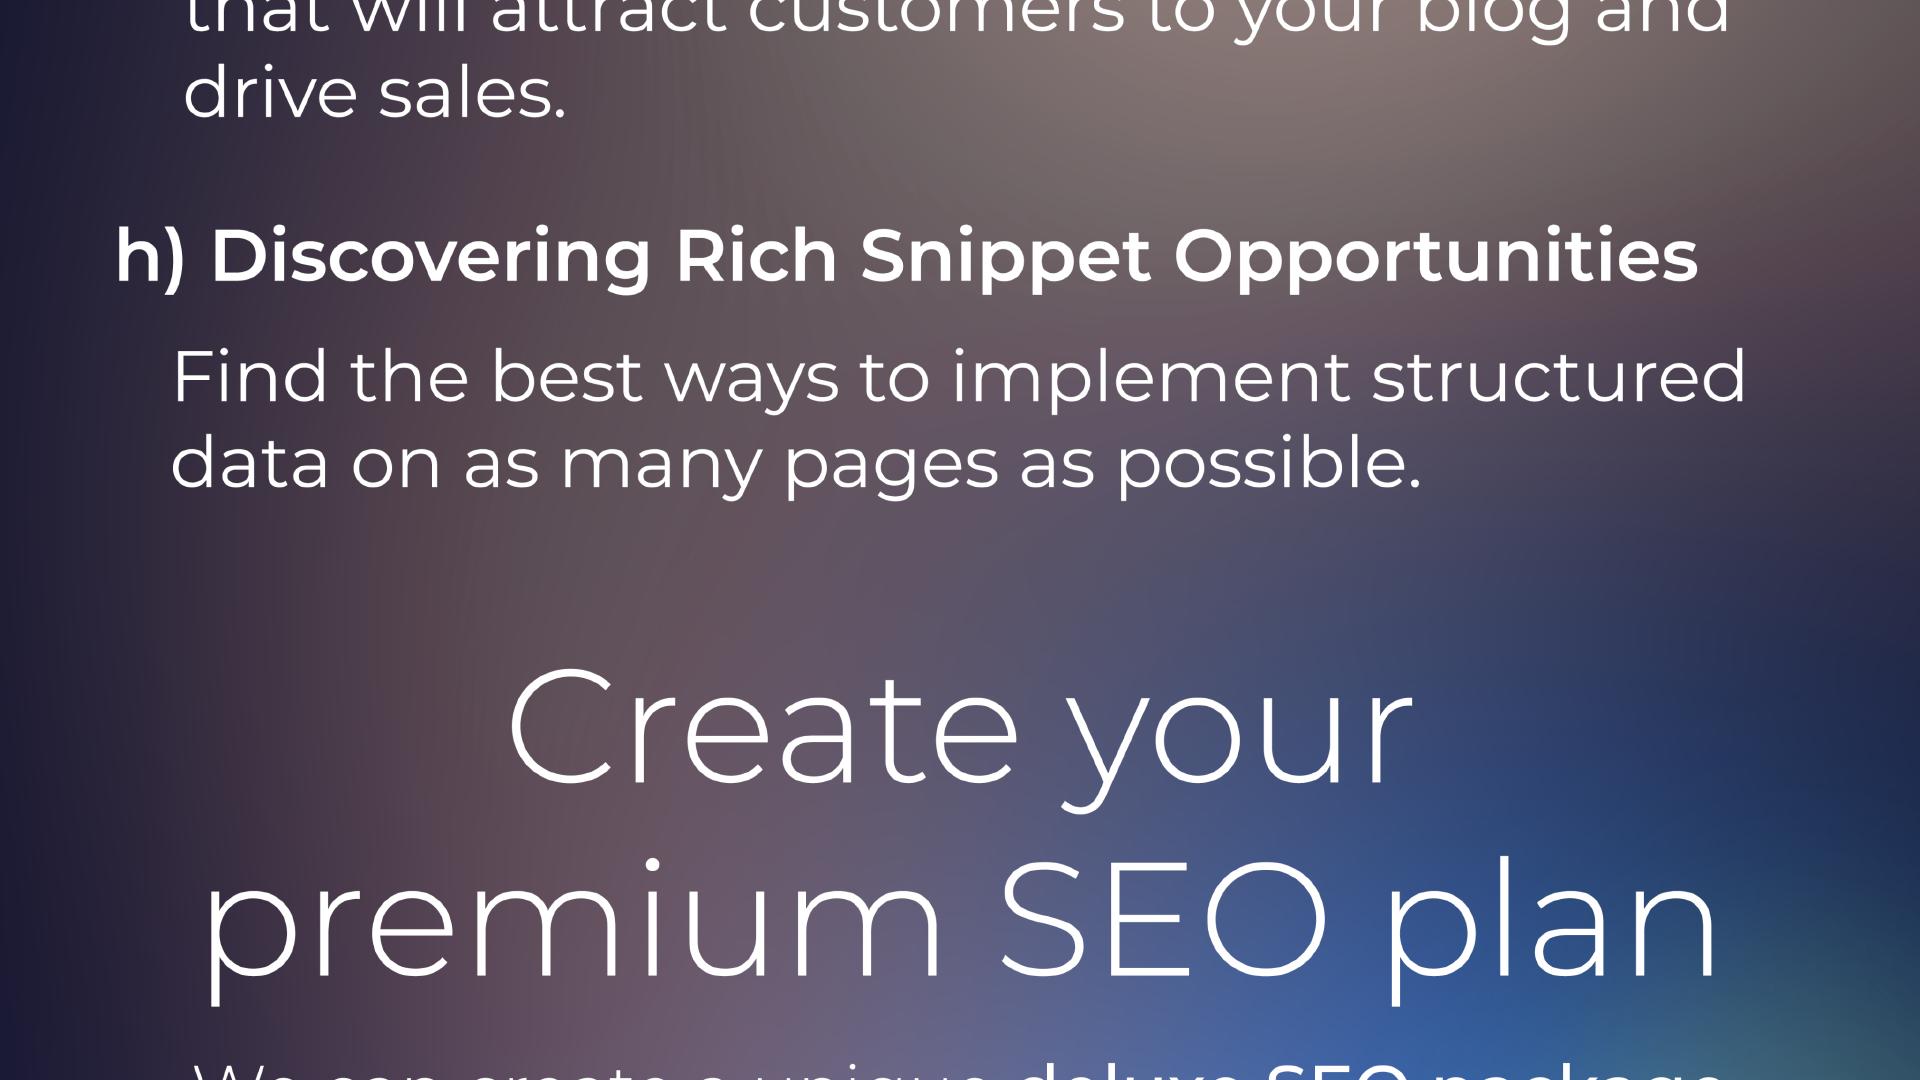 ... that will attract customers to your blog and drive sales. h) Discovering Rich Snippet Opportunities Find the best ways to implement structured data on as many pages as possible. Create your premium SEO plan.